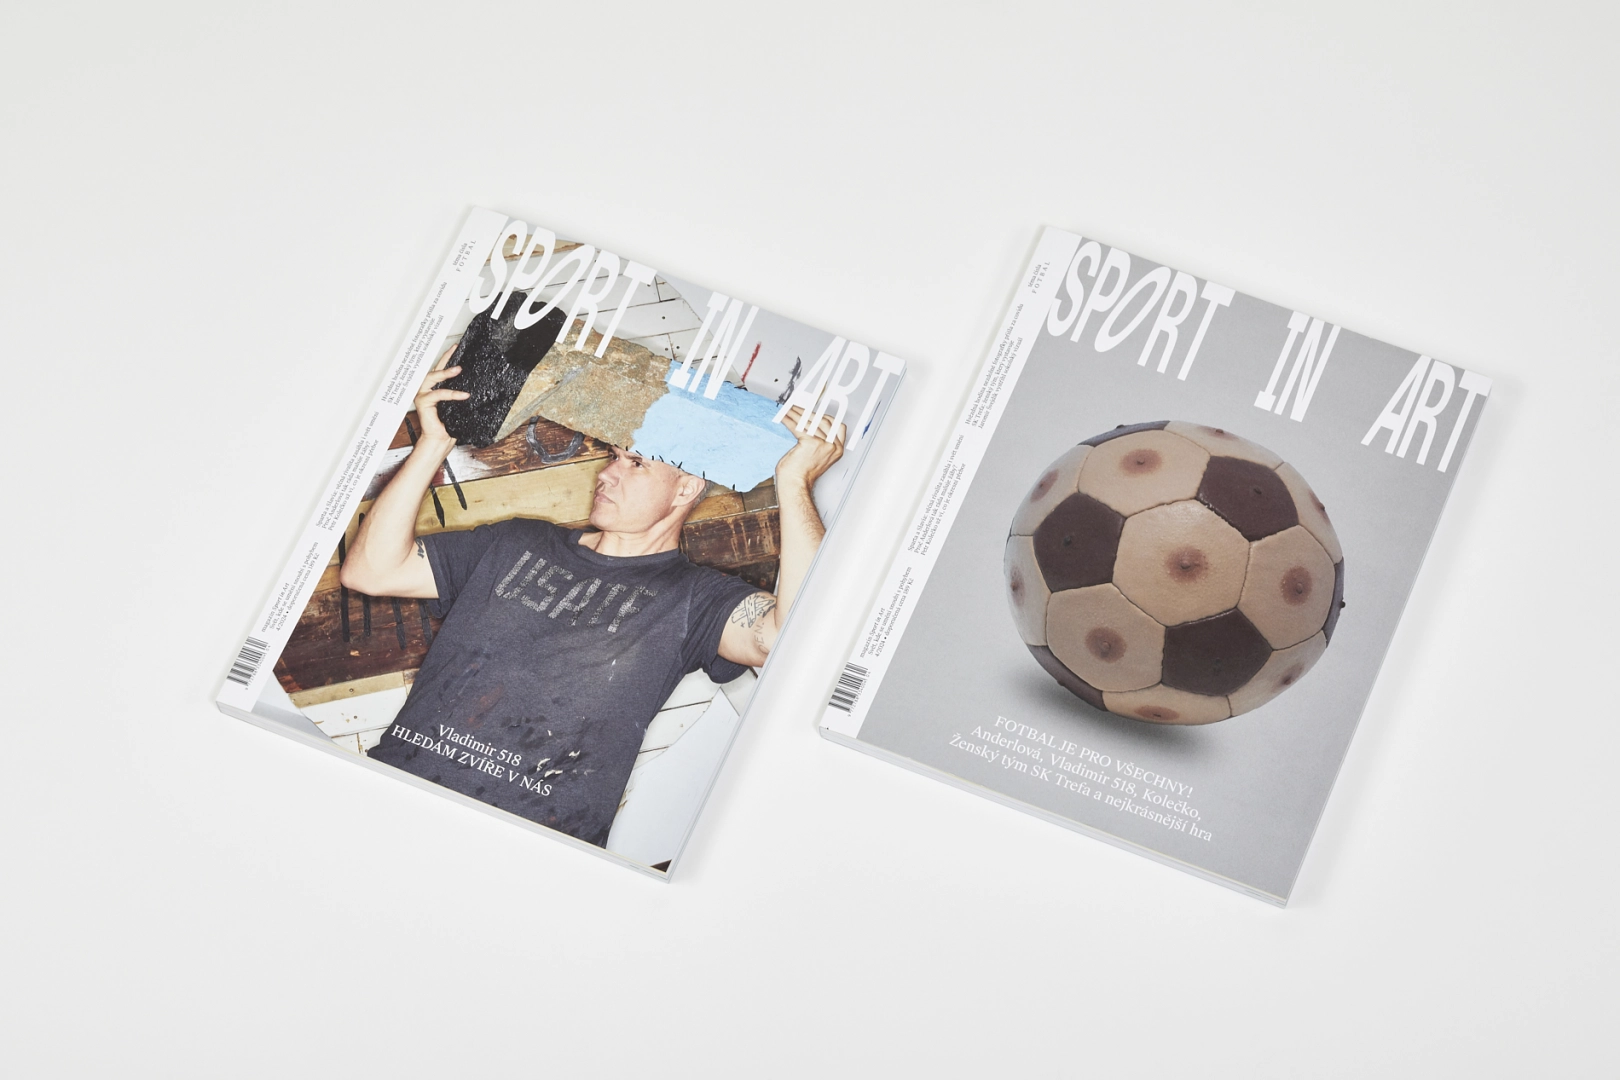 On June 10th, the fourth football issue of Sport in Art magazine will be released